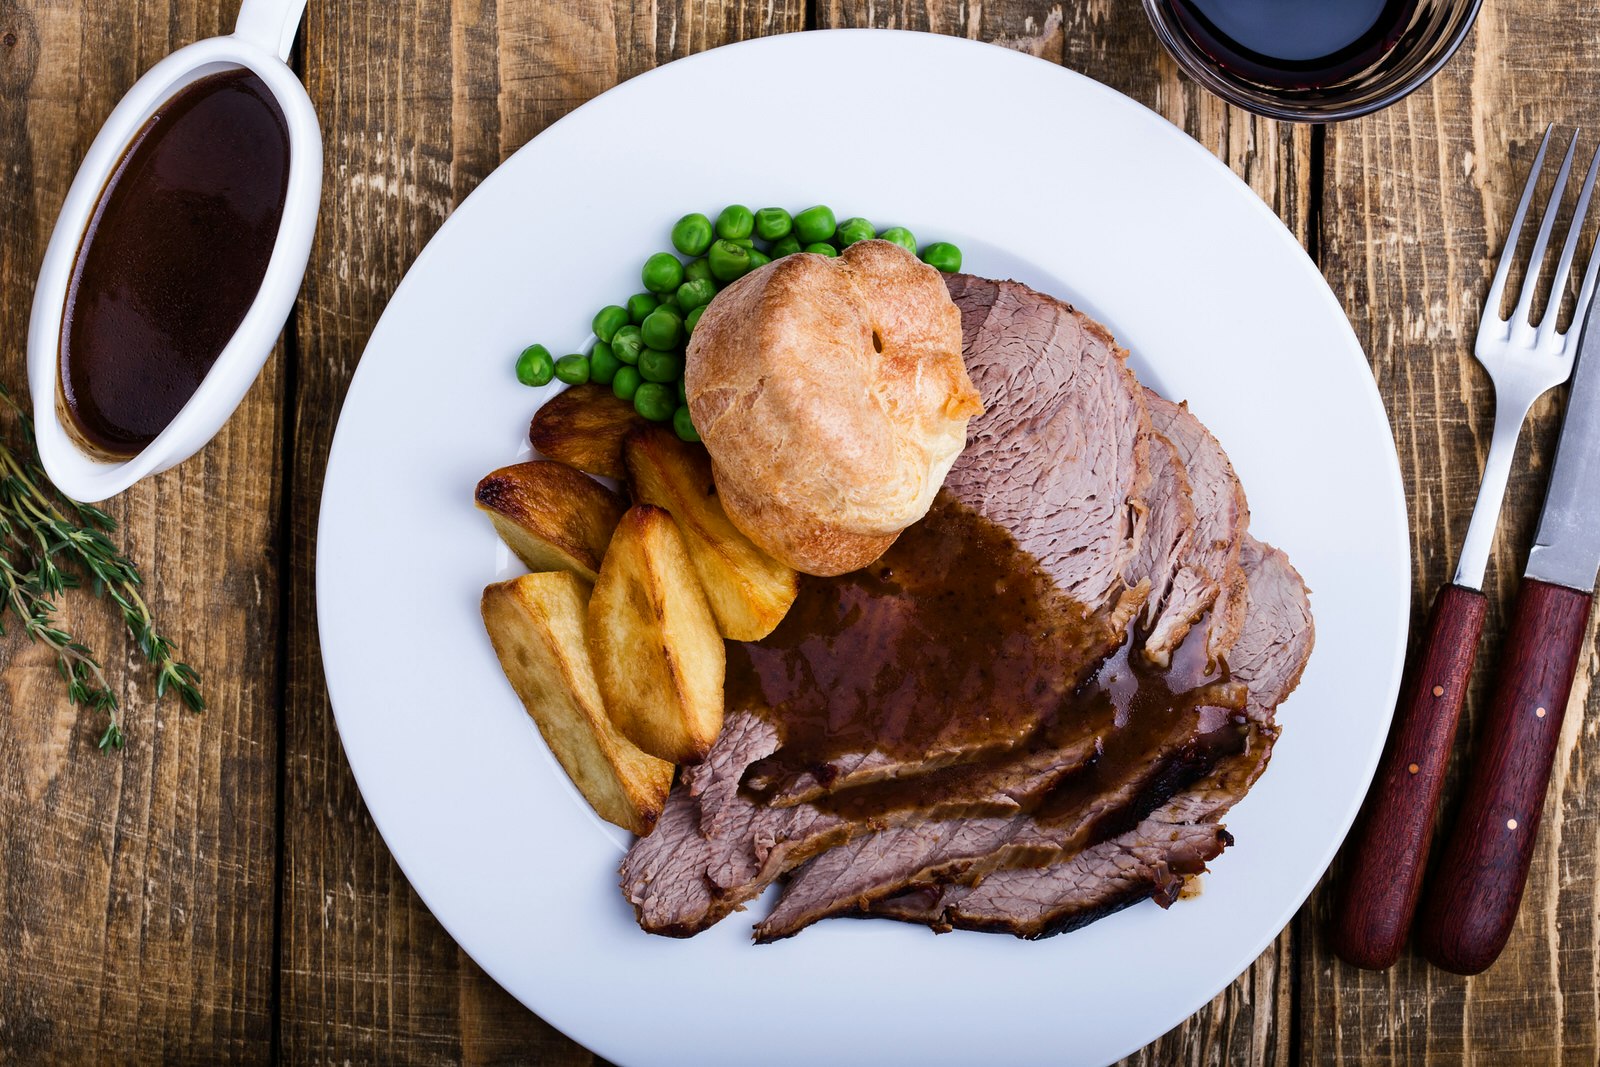 Sunday roast with roast beef, roast potatoes, green peas, Yorkshire pudding and gravy on a rustic wooden table viewed from above; a traditional British dish.